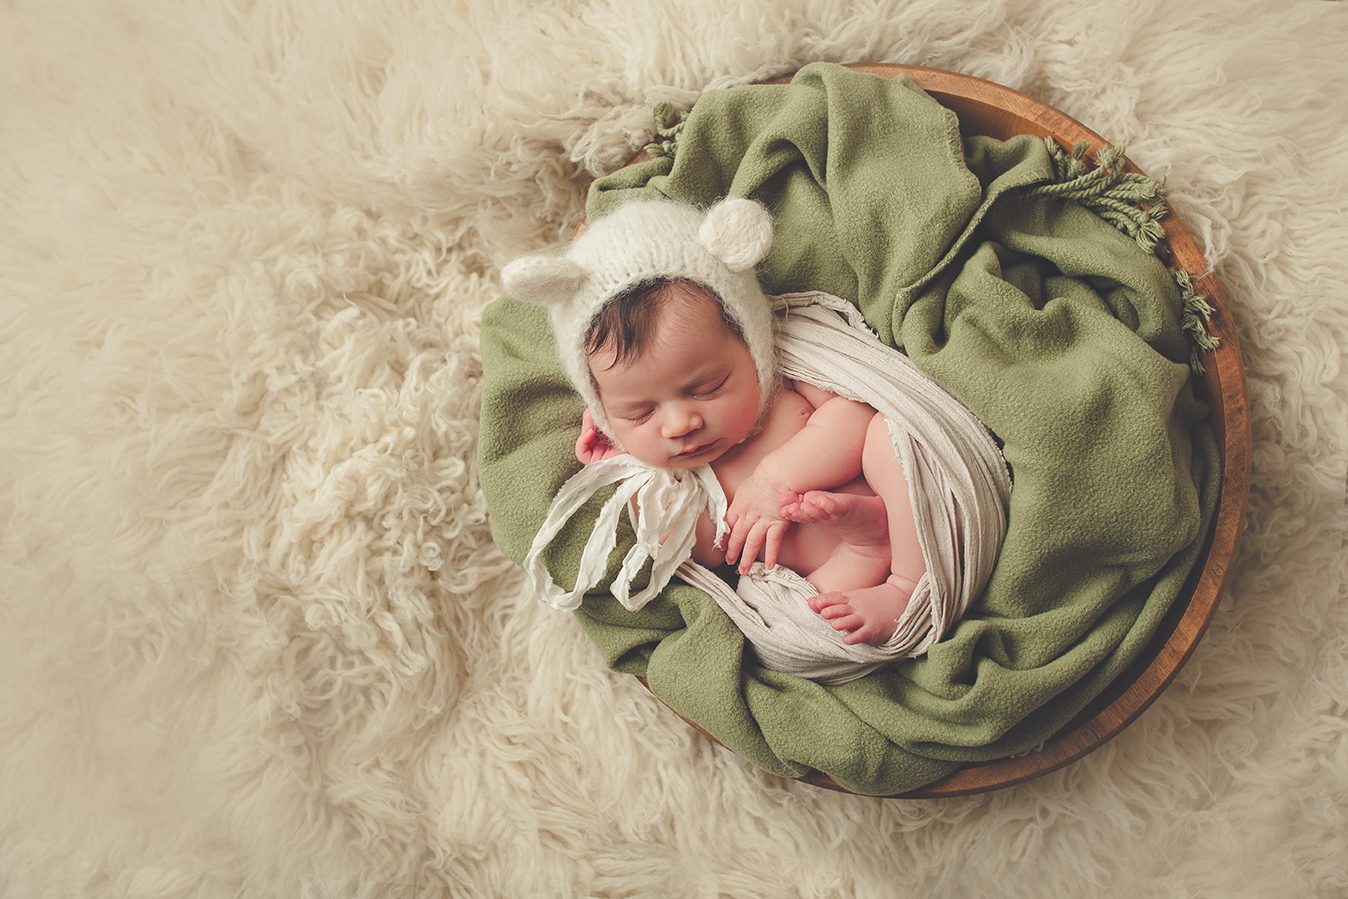 posed newborn photography with green blanket in antique bowl